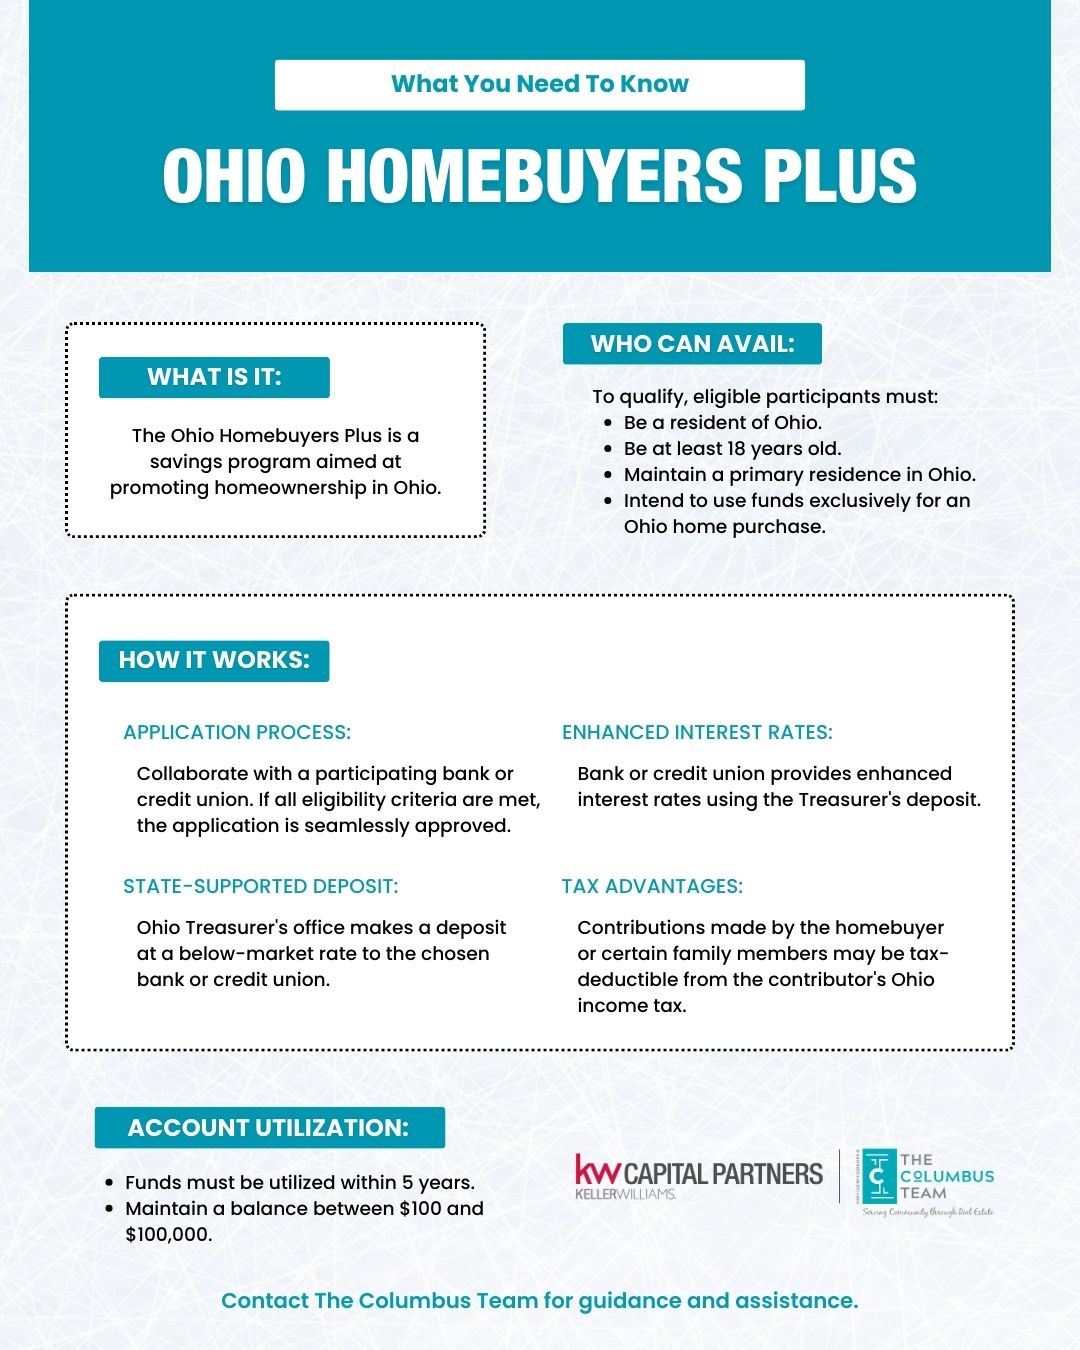 Informational image with text outlining what you need to know for the Ohio Homebuyers Plus savings program.